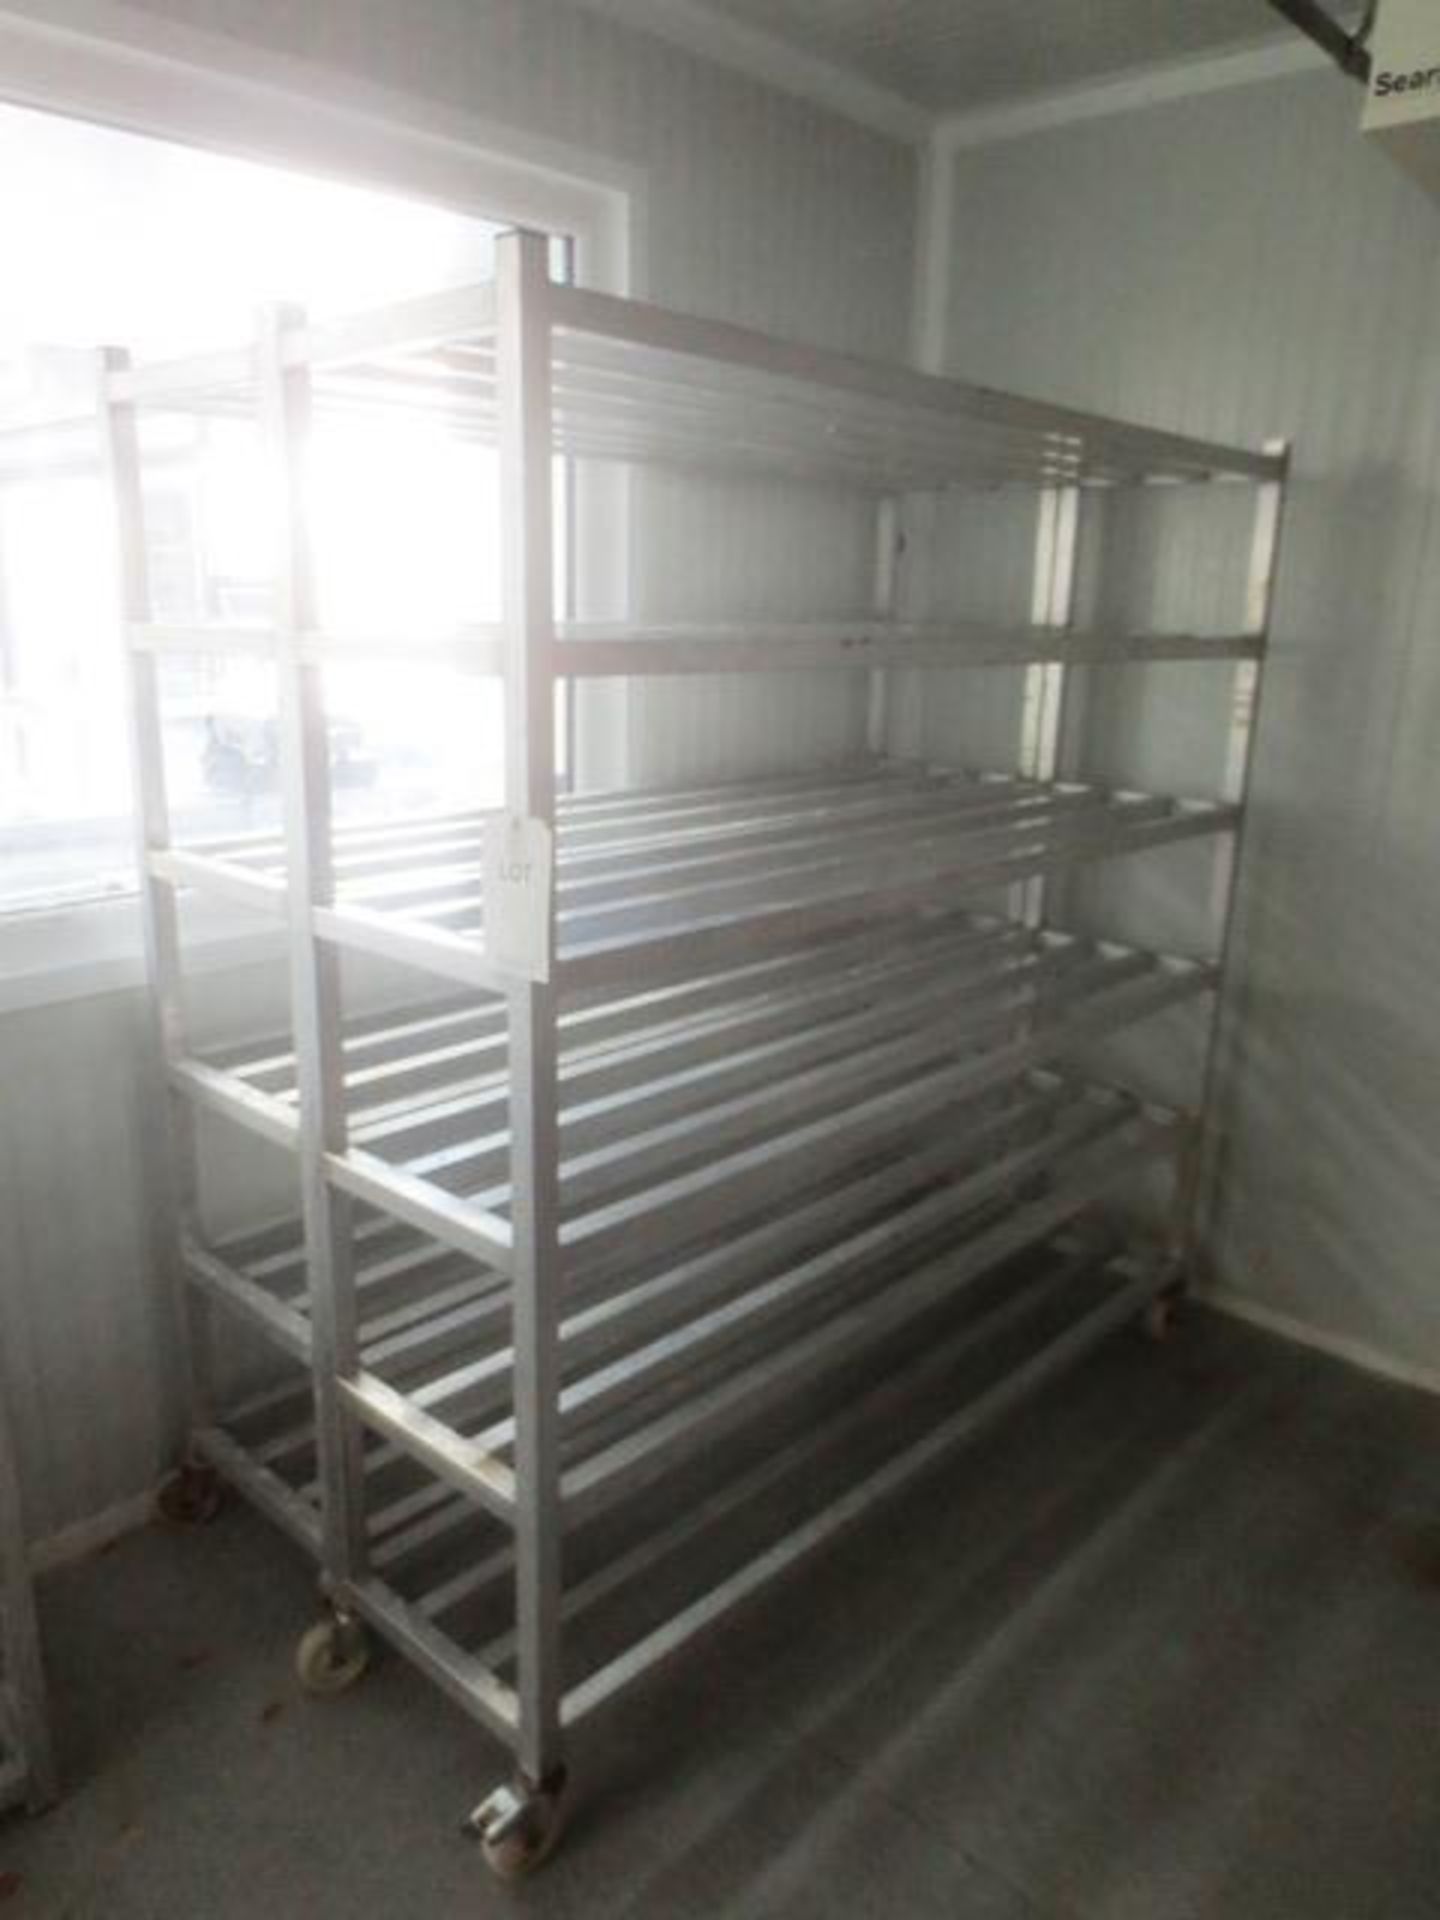 Two stainless steel mobile storage racks, approx 1800 x 450mm